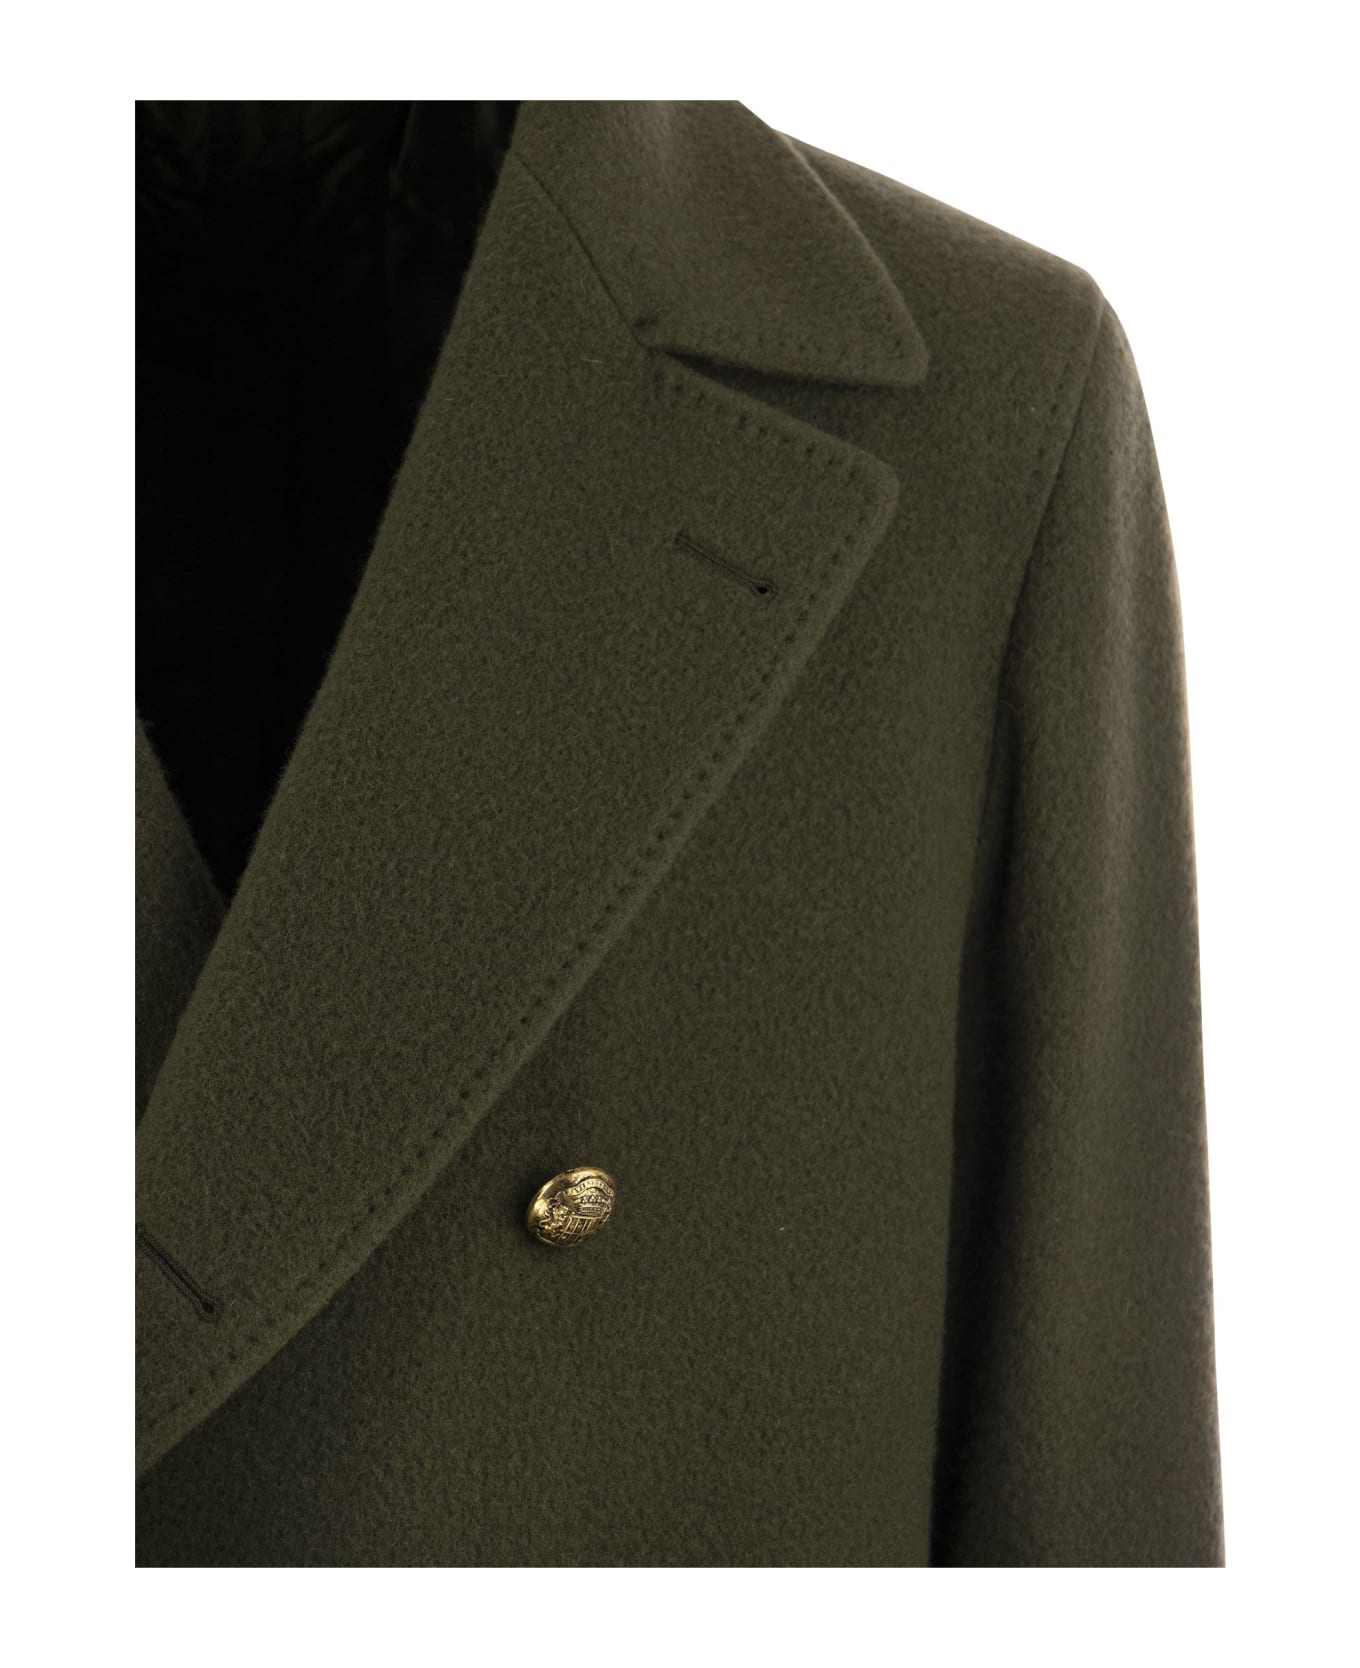 Tagliatore Arden - Double-breasted Wool Coat - Military Green コート